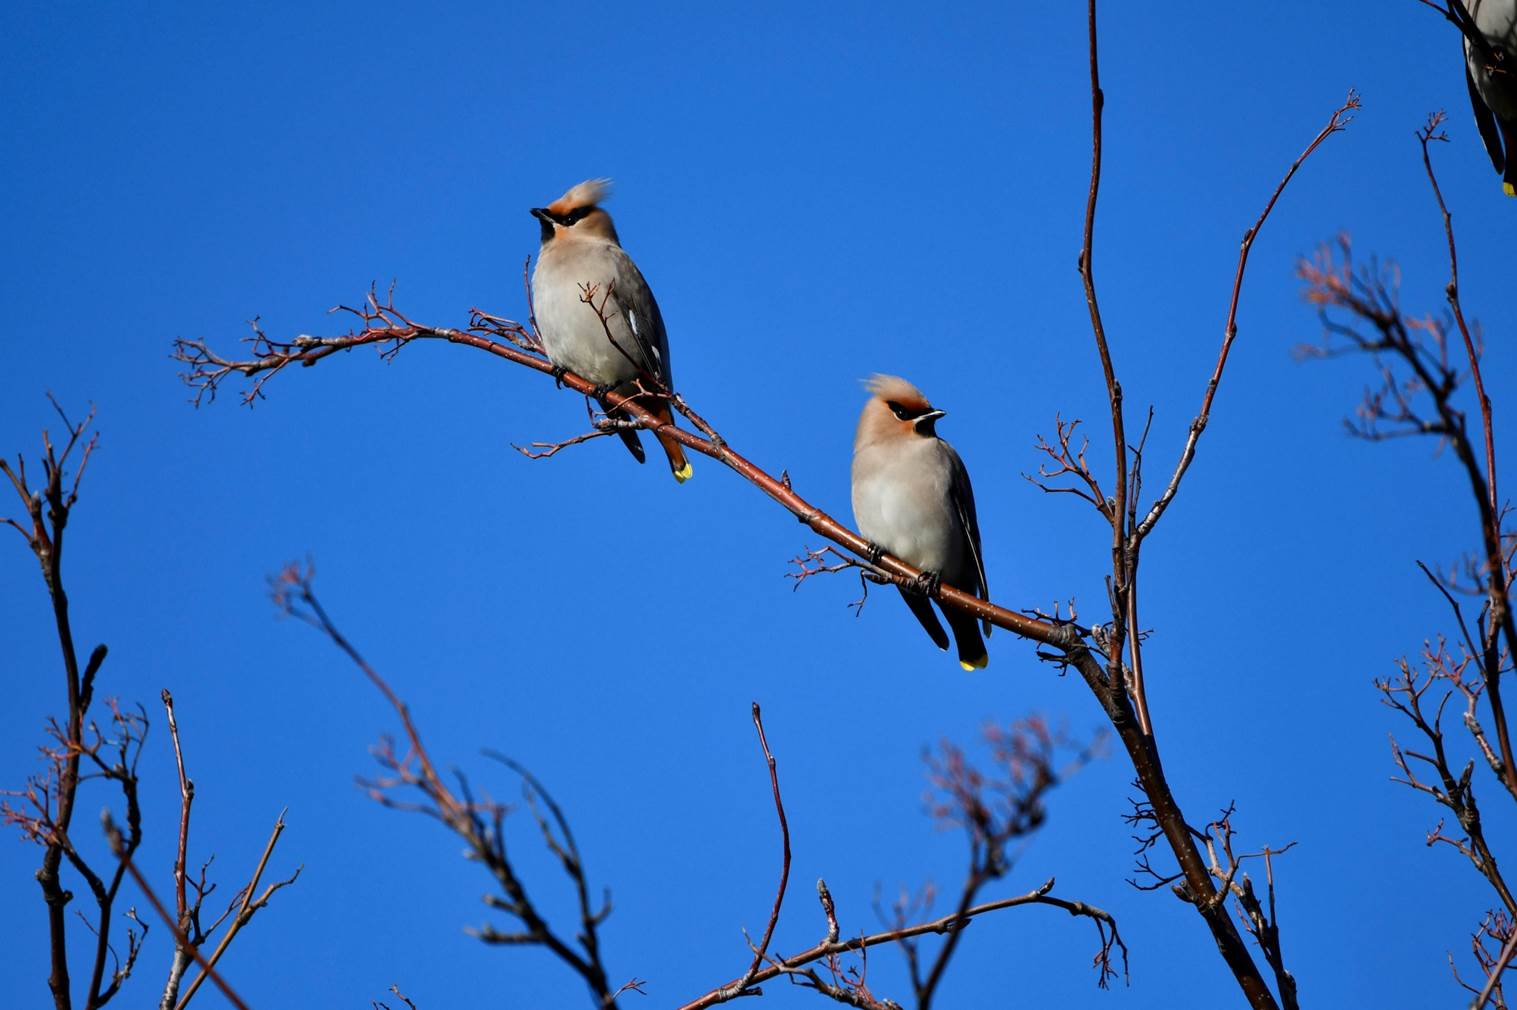 Birds sitting on a branch

Description automatically generated